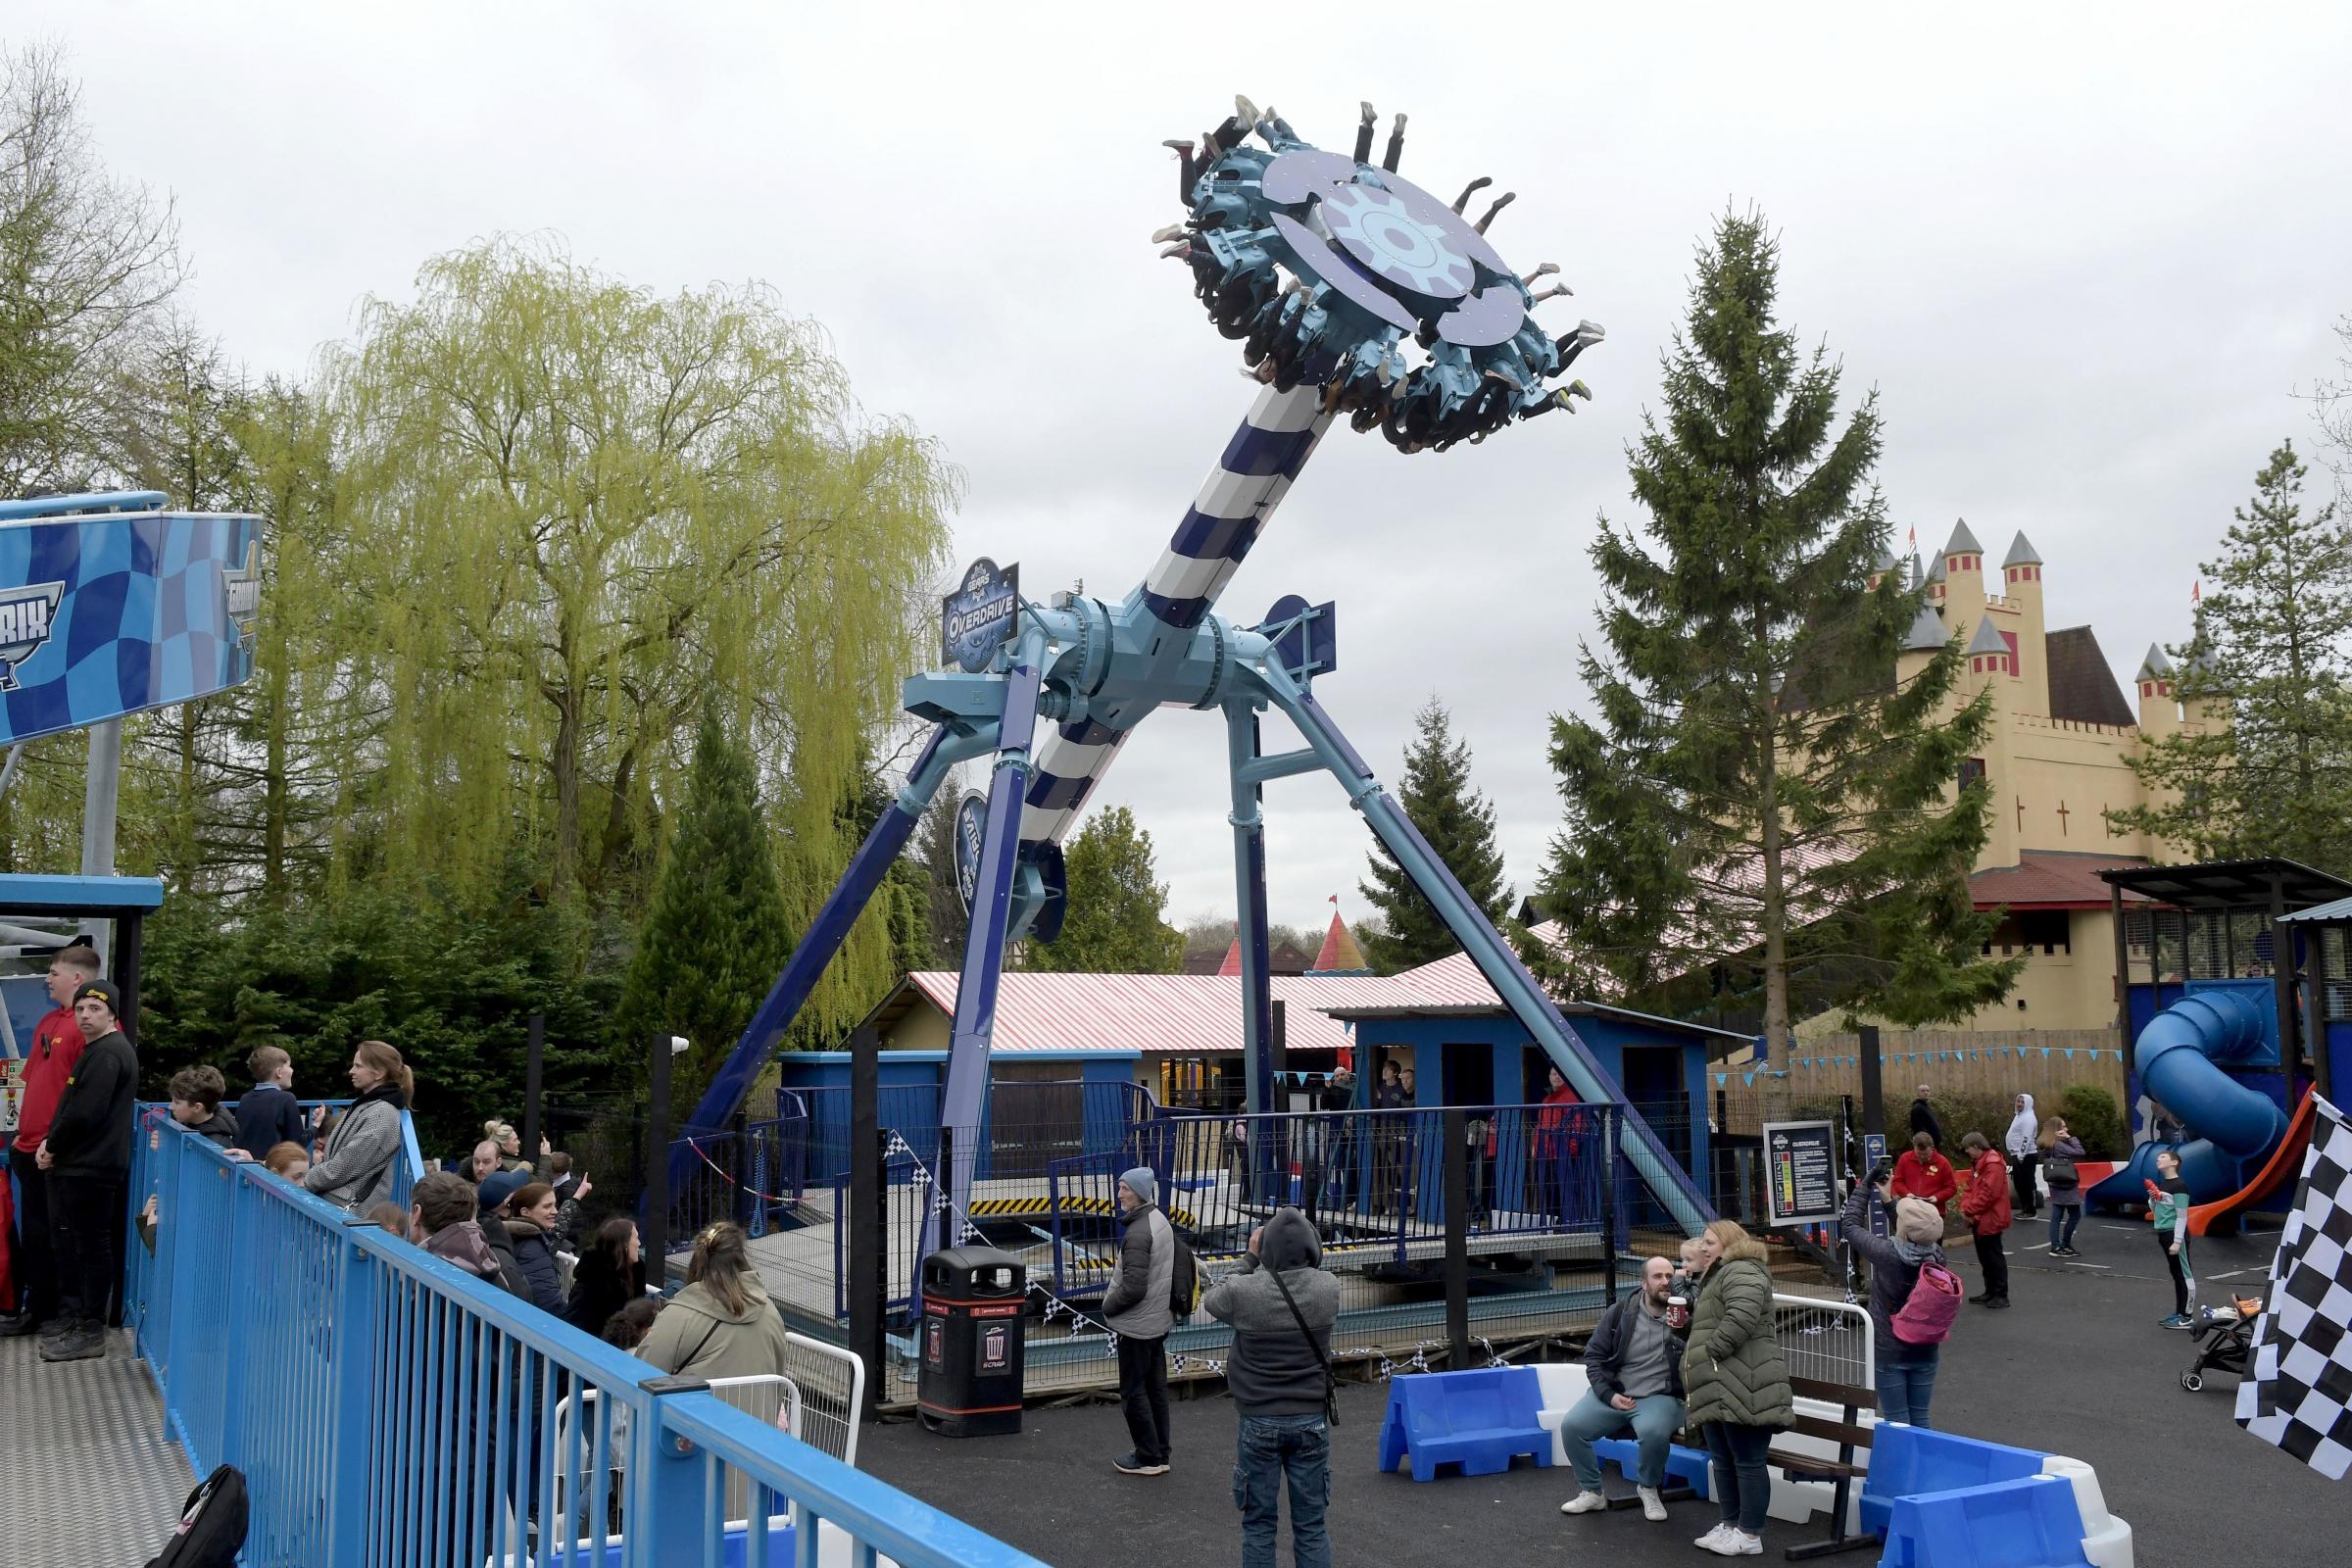 The new rides at Gullivers launched at the weekend